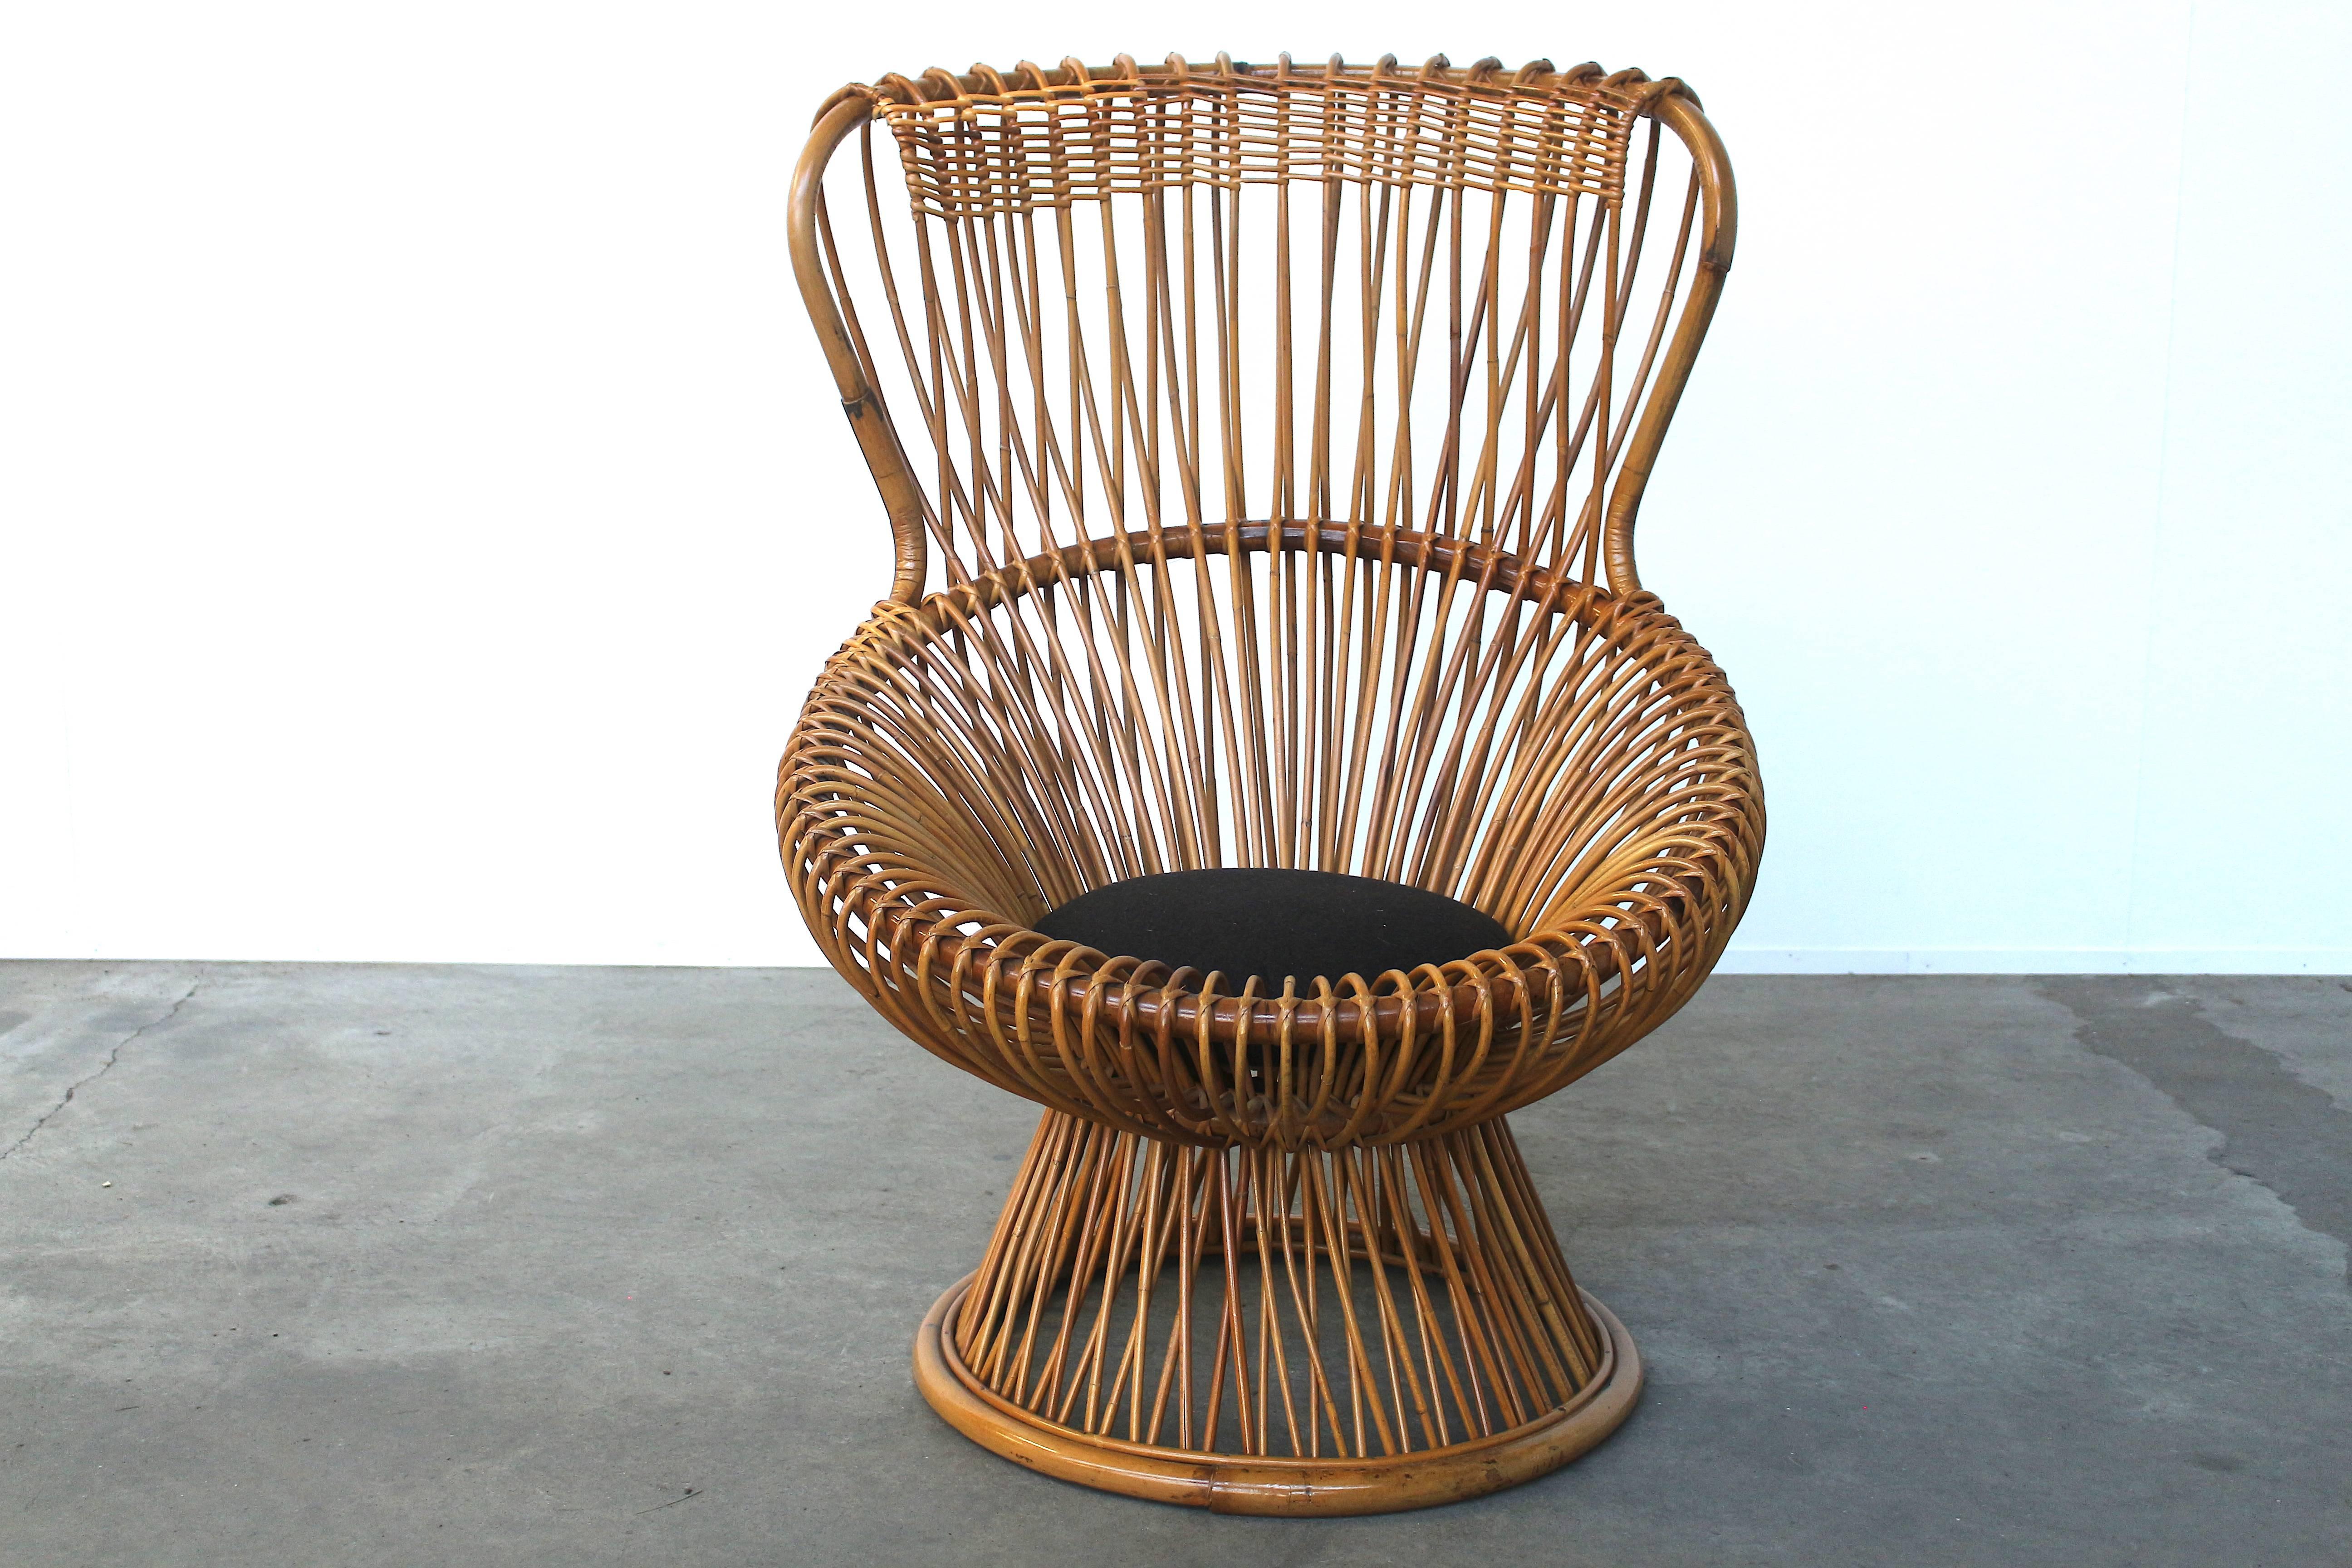 Beautiful rattan chair by Franco Albini, manufactured by Bonacina. All the rattan is in absolutely wonderful condition, no flaws or damages whatsoever. It is also professionally treated against the weather, so is suitable for outdoor use. Comes with